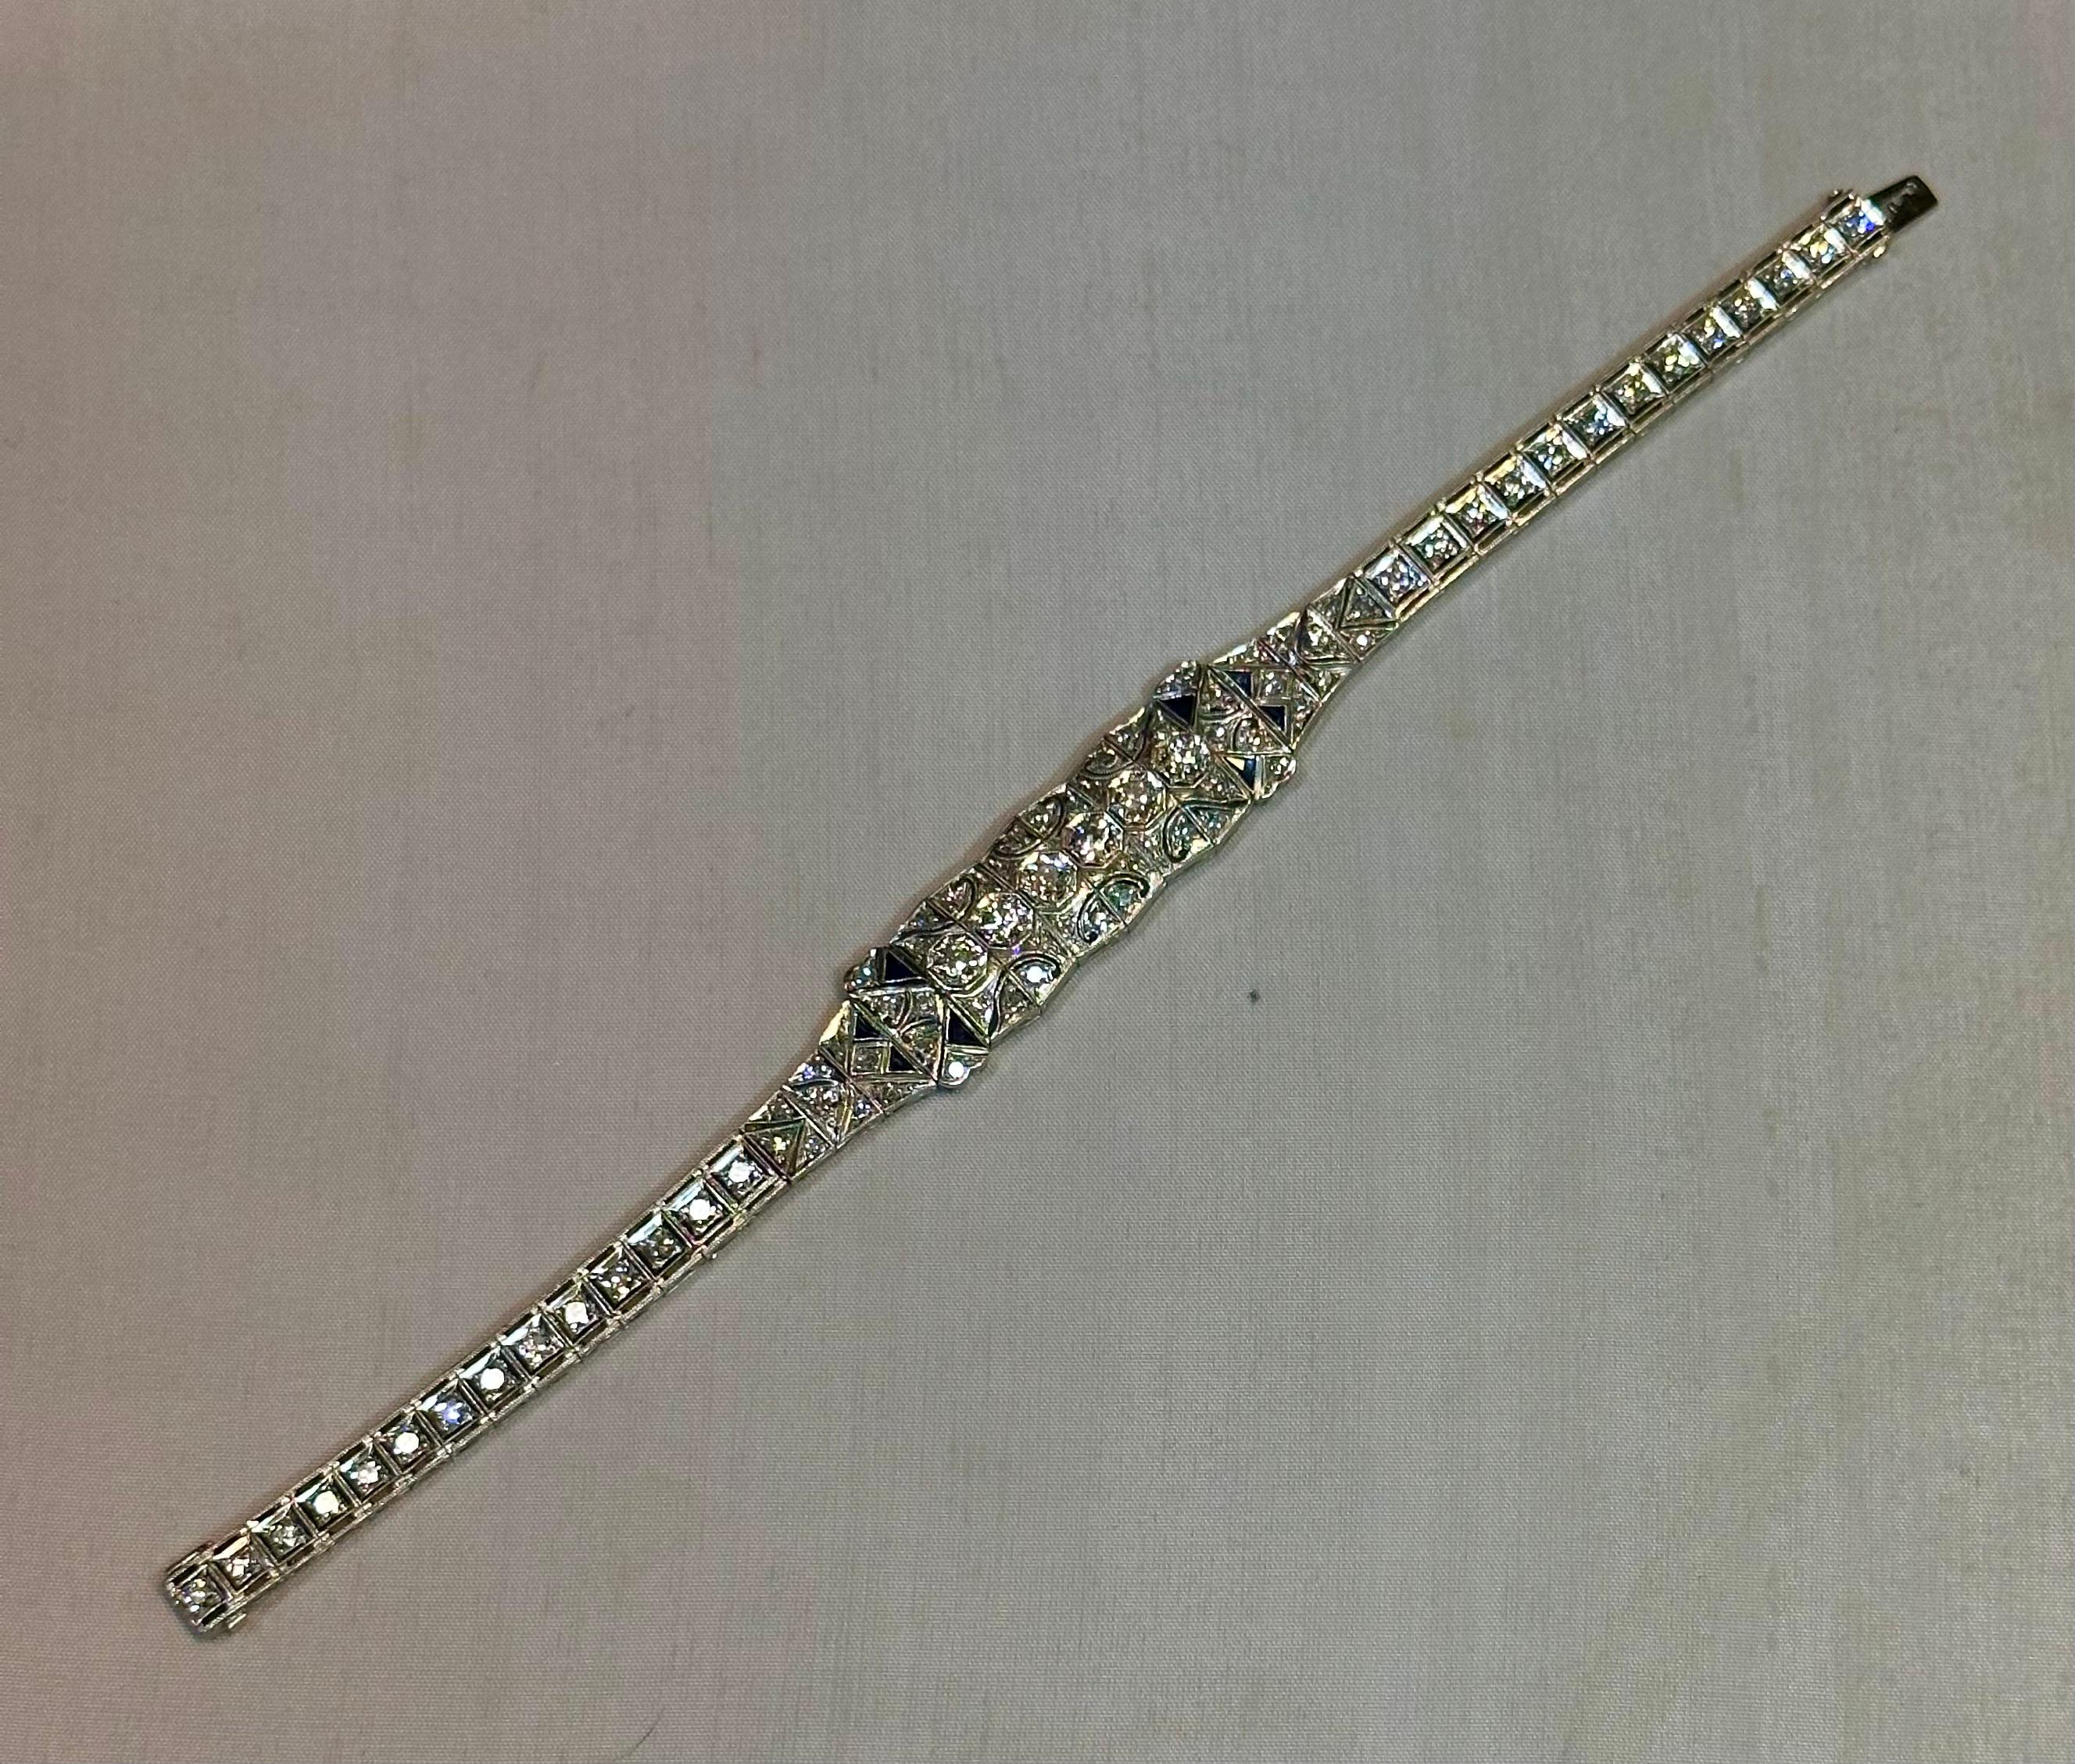 This vintage early 20th century Edwardian (1902 - 1918) diamond bracelet is elaborately designed in platinum & multiple precious gems. The bracelet center features six embellished center panels with sparkling round faceted diamonds. The center